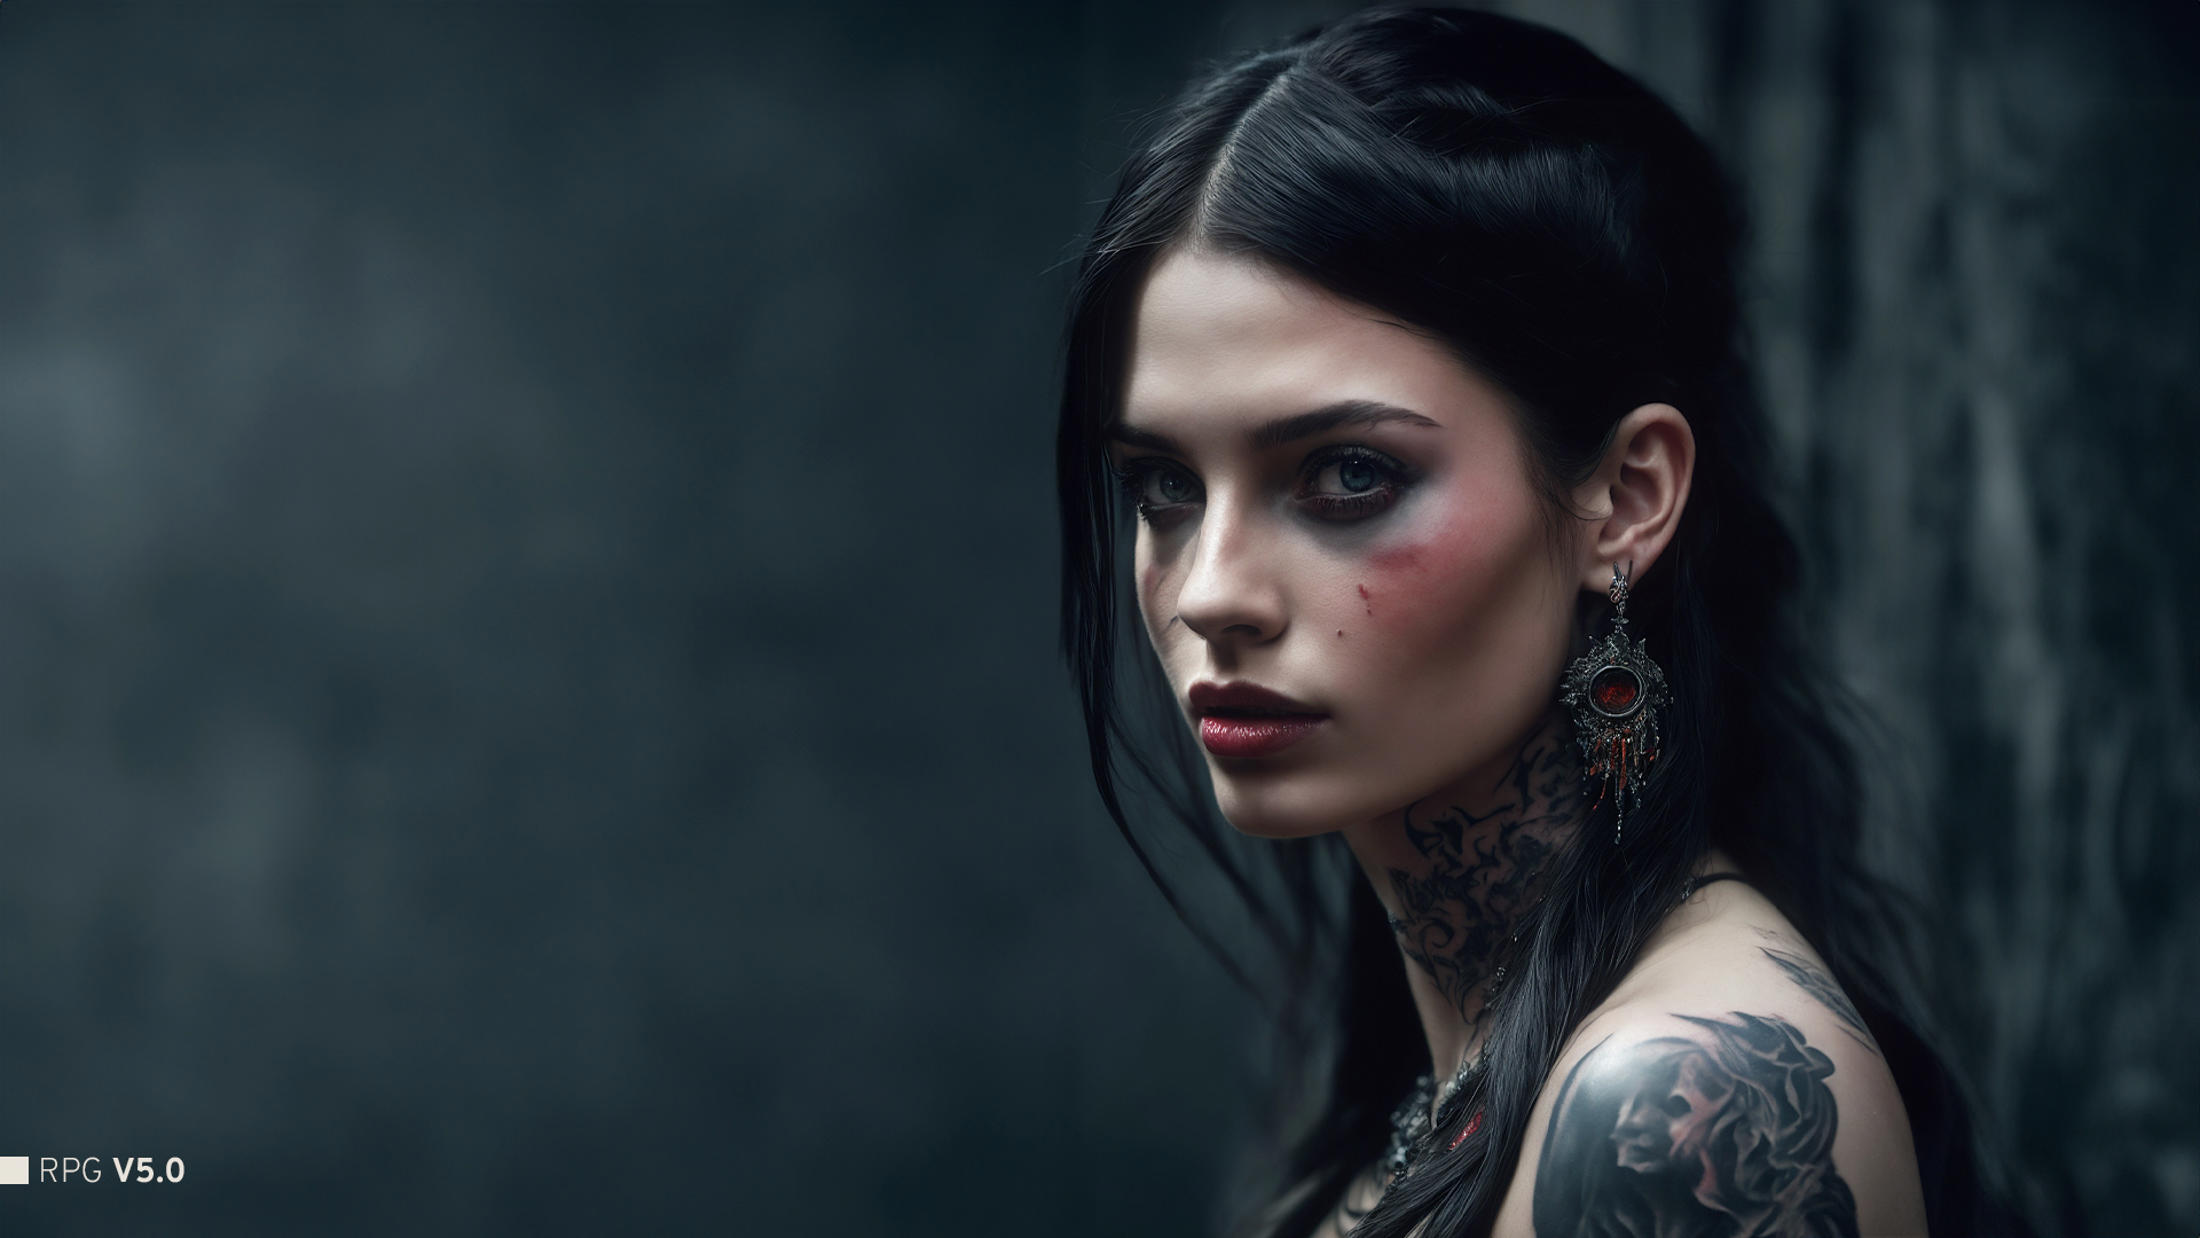 A woman with a tattooed face and lipstick, looking away from the camera.